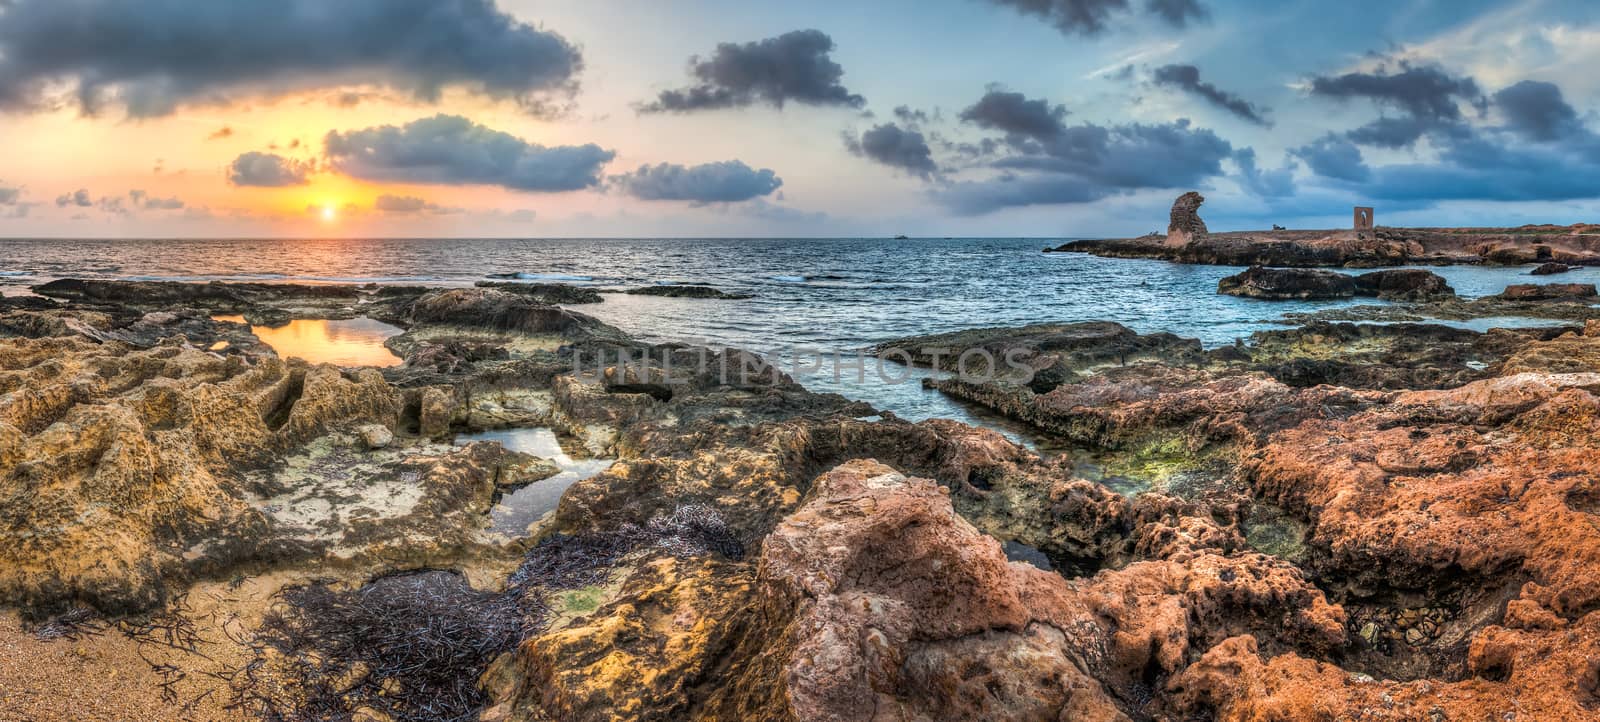 sunset over the sea and rocky coast by Kayco